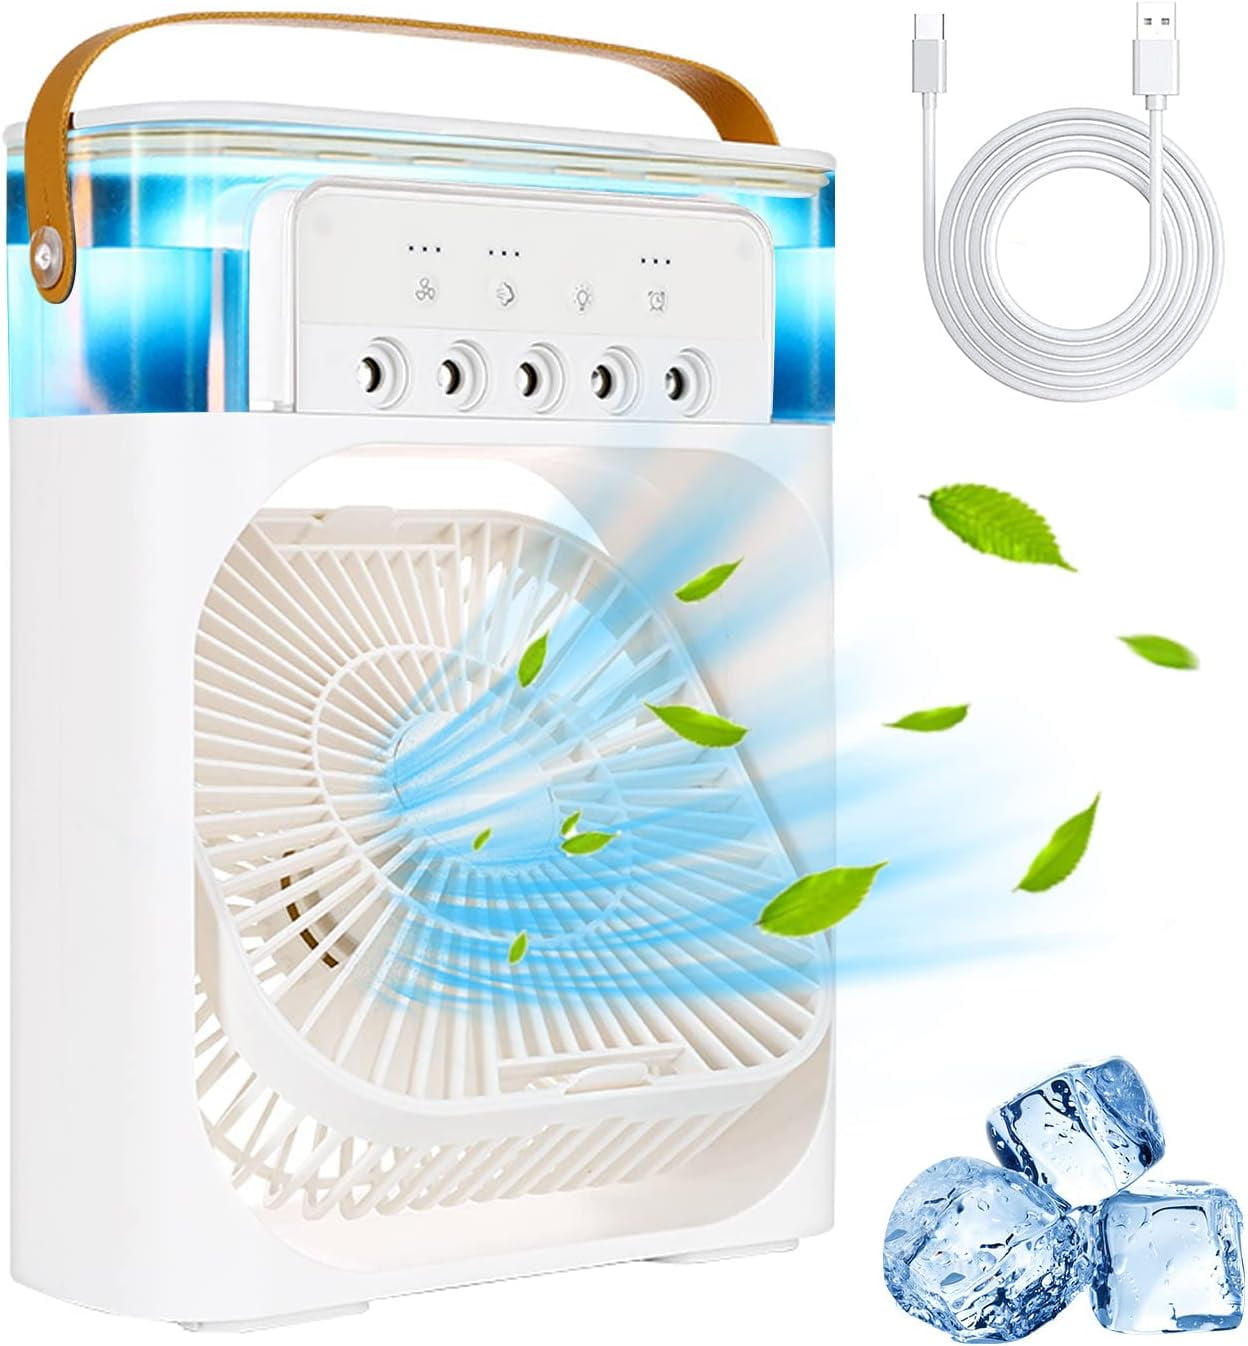 Dropship Air Cooler Portable Cooling Fan Humidifier to Sell Online at a  Lower Price